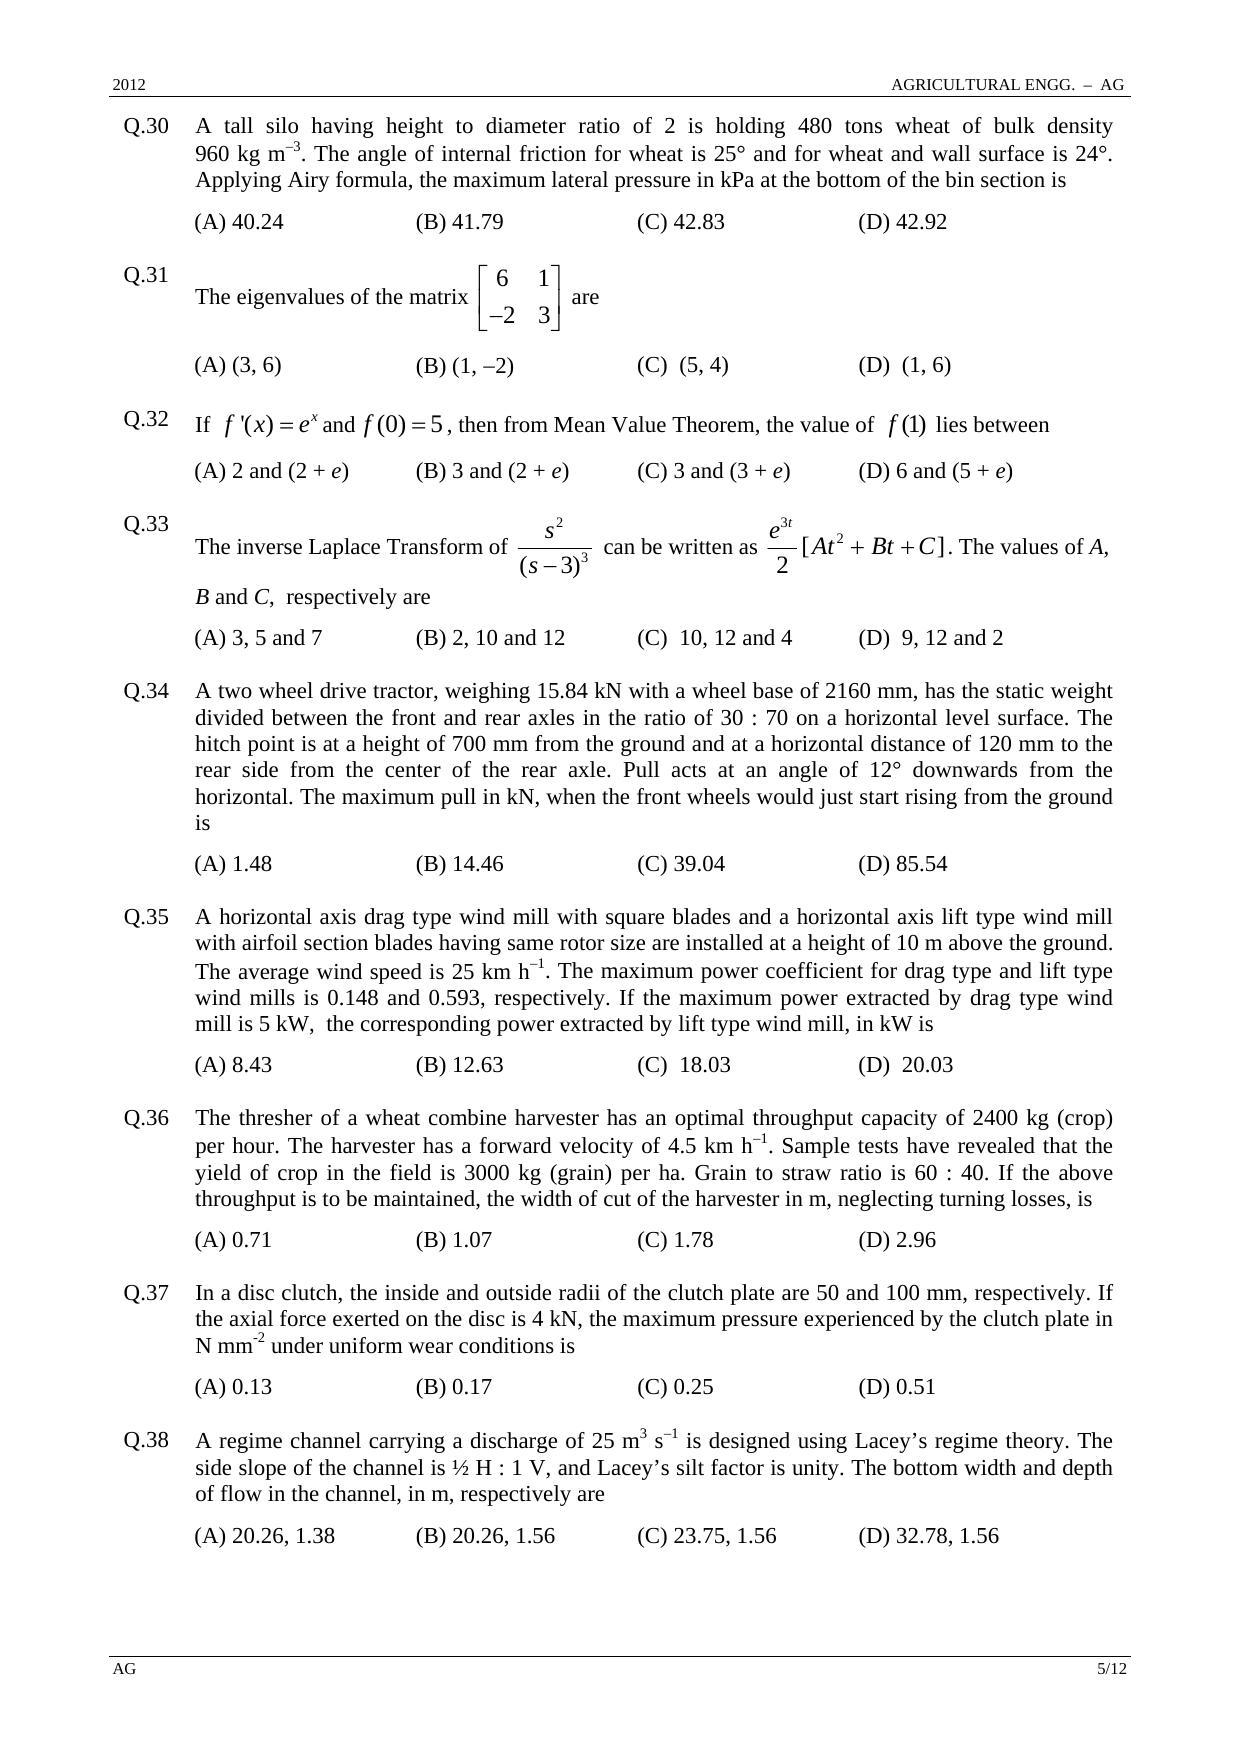 GATE 2012 Agricultural Engineering (AG) Question Paper with Answer Key - Page 5